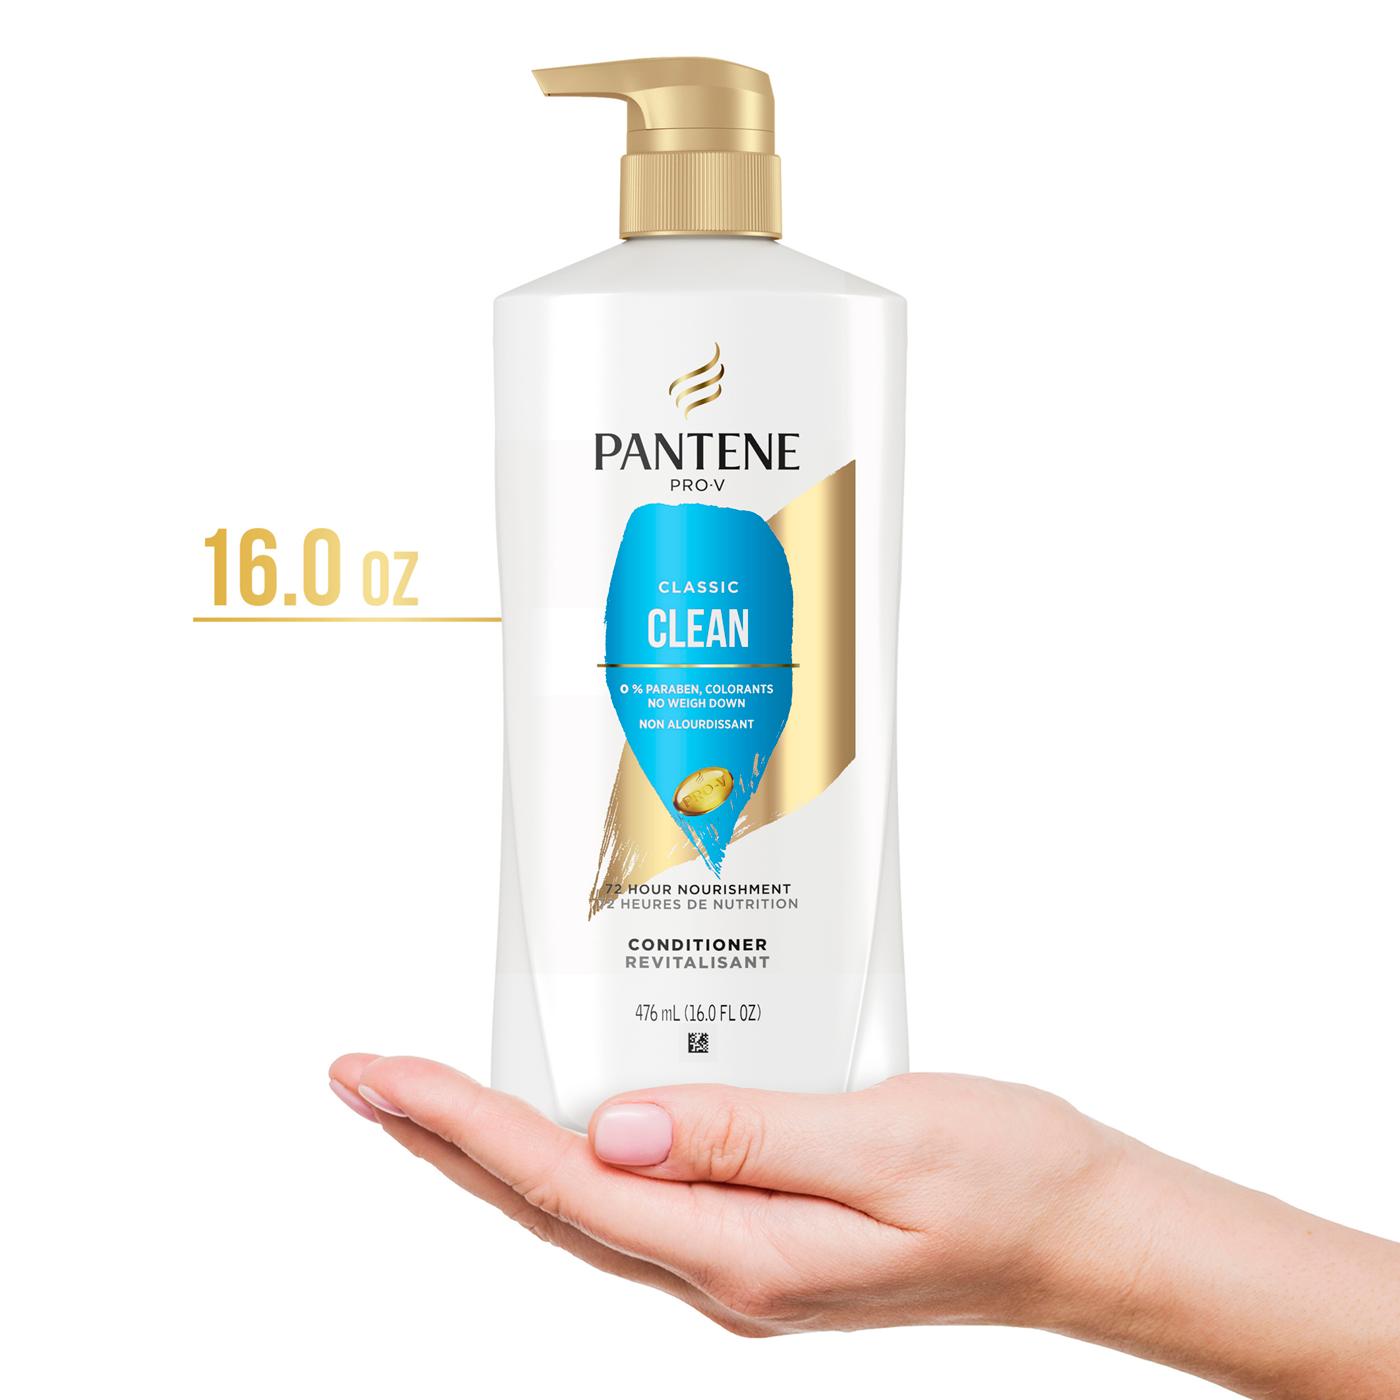 Pantene PRO-V Classic Clean Conditioner; image 5 of 10